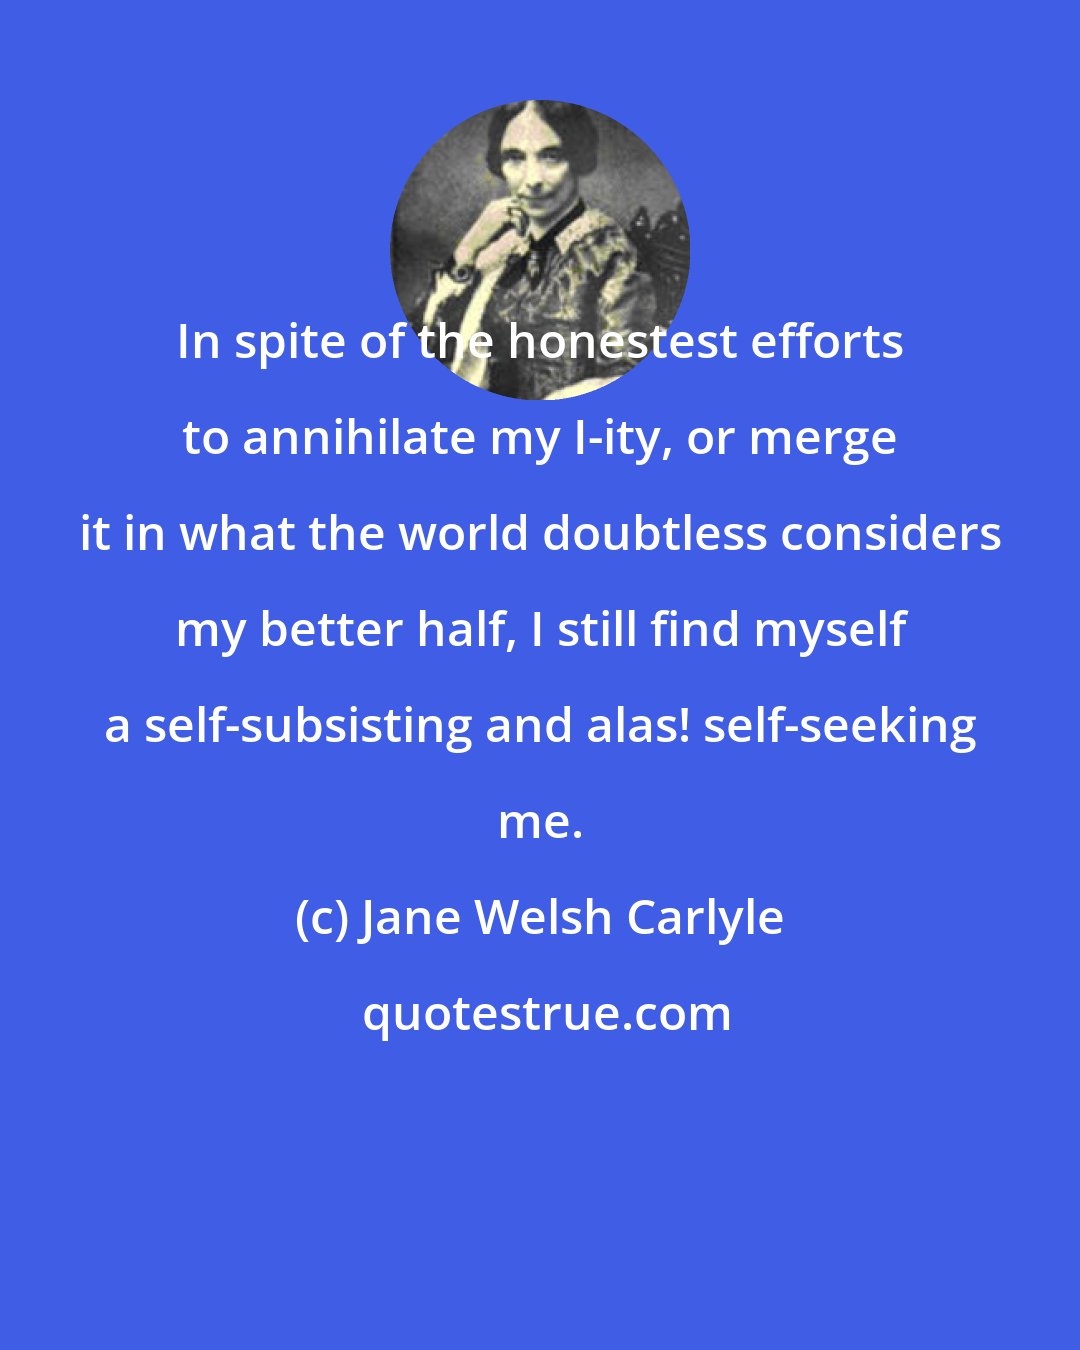 Jane Welsh Carlyle: In spite of the honestest efforts to annihilate my I-ity, or merge it in what the world doubtless considers my better half, I still find myself a self-subsisting and alas! self-seeking me.